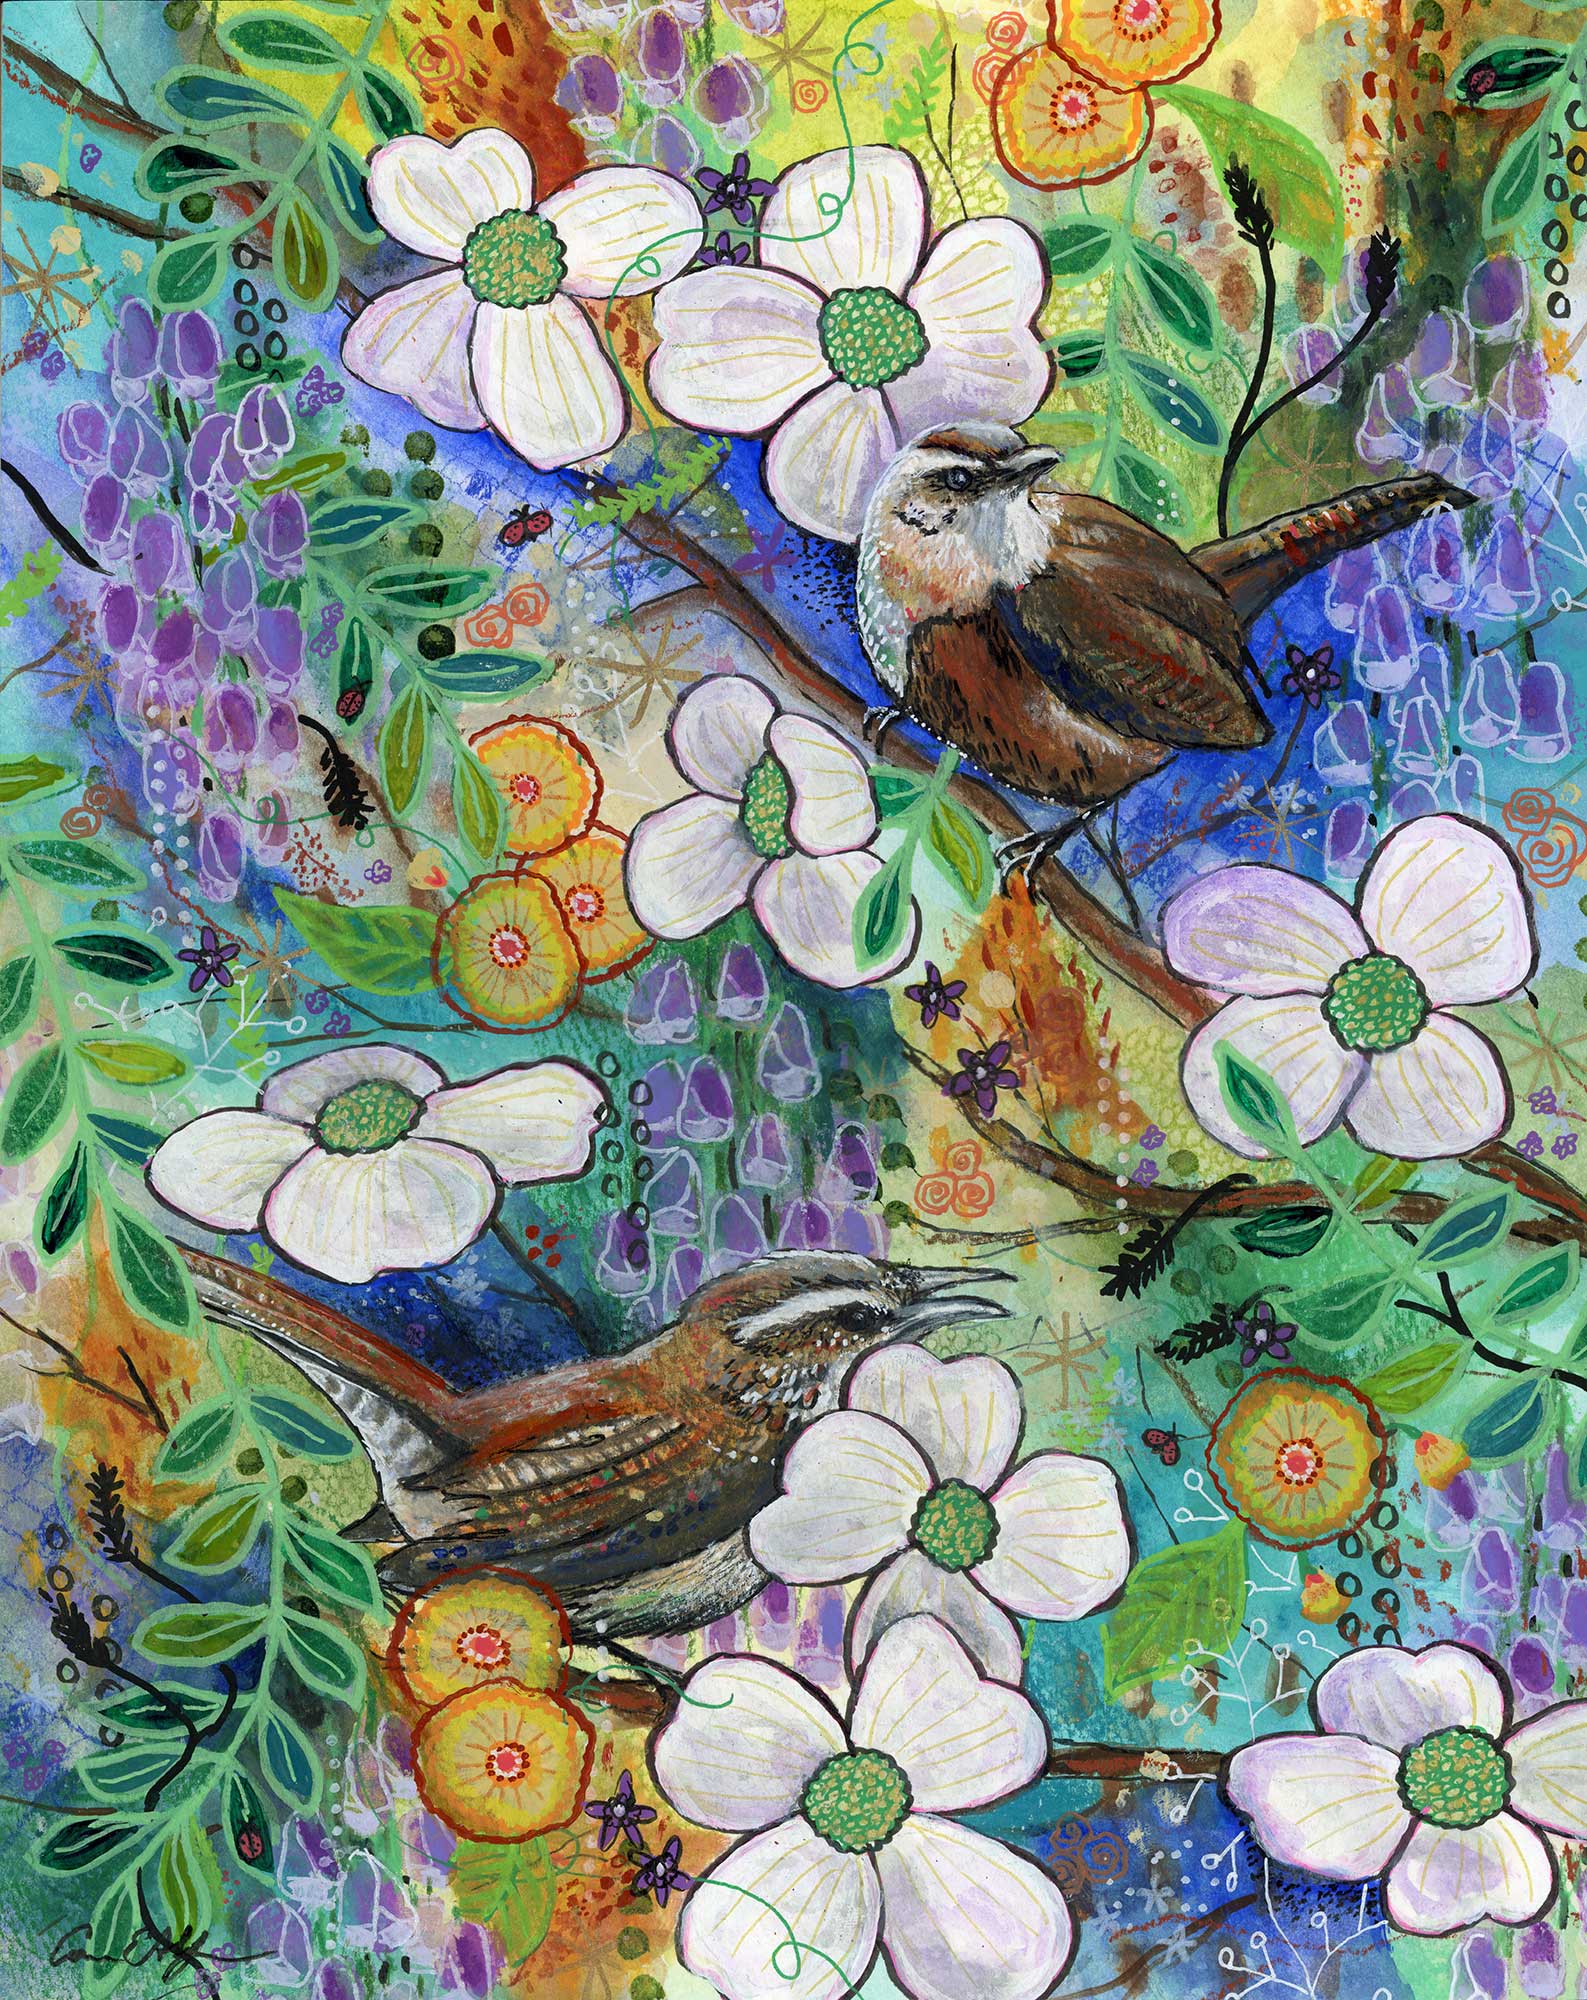 SOLD - Wrens in Dogwoods, 11" x 14", mixed media